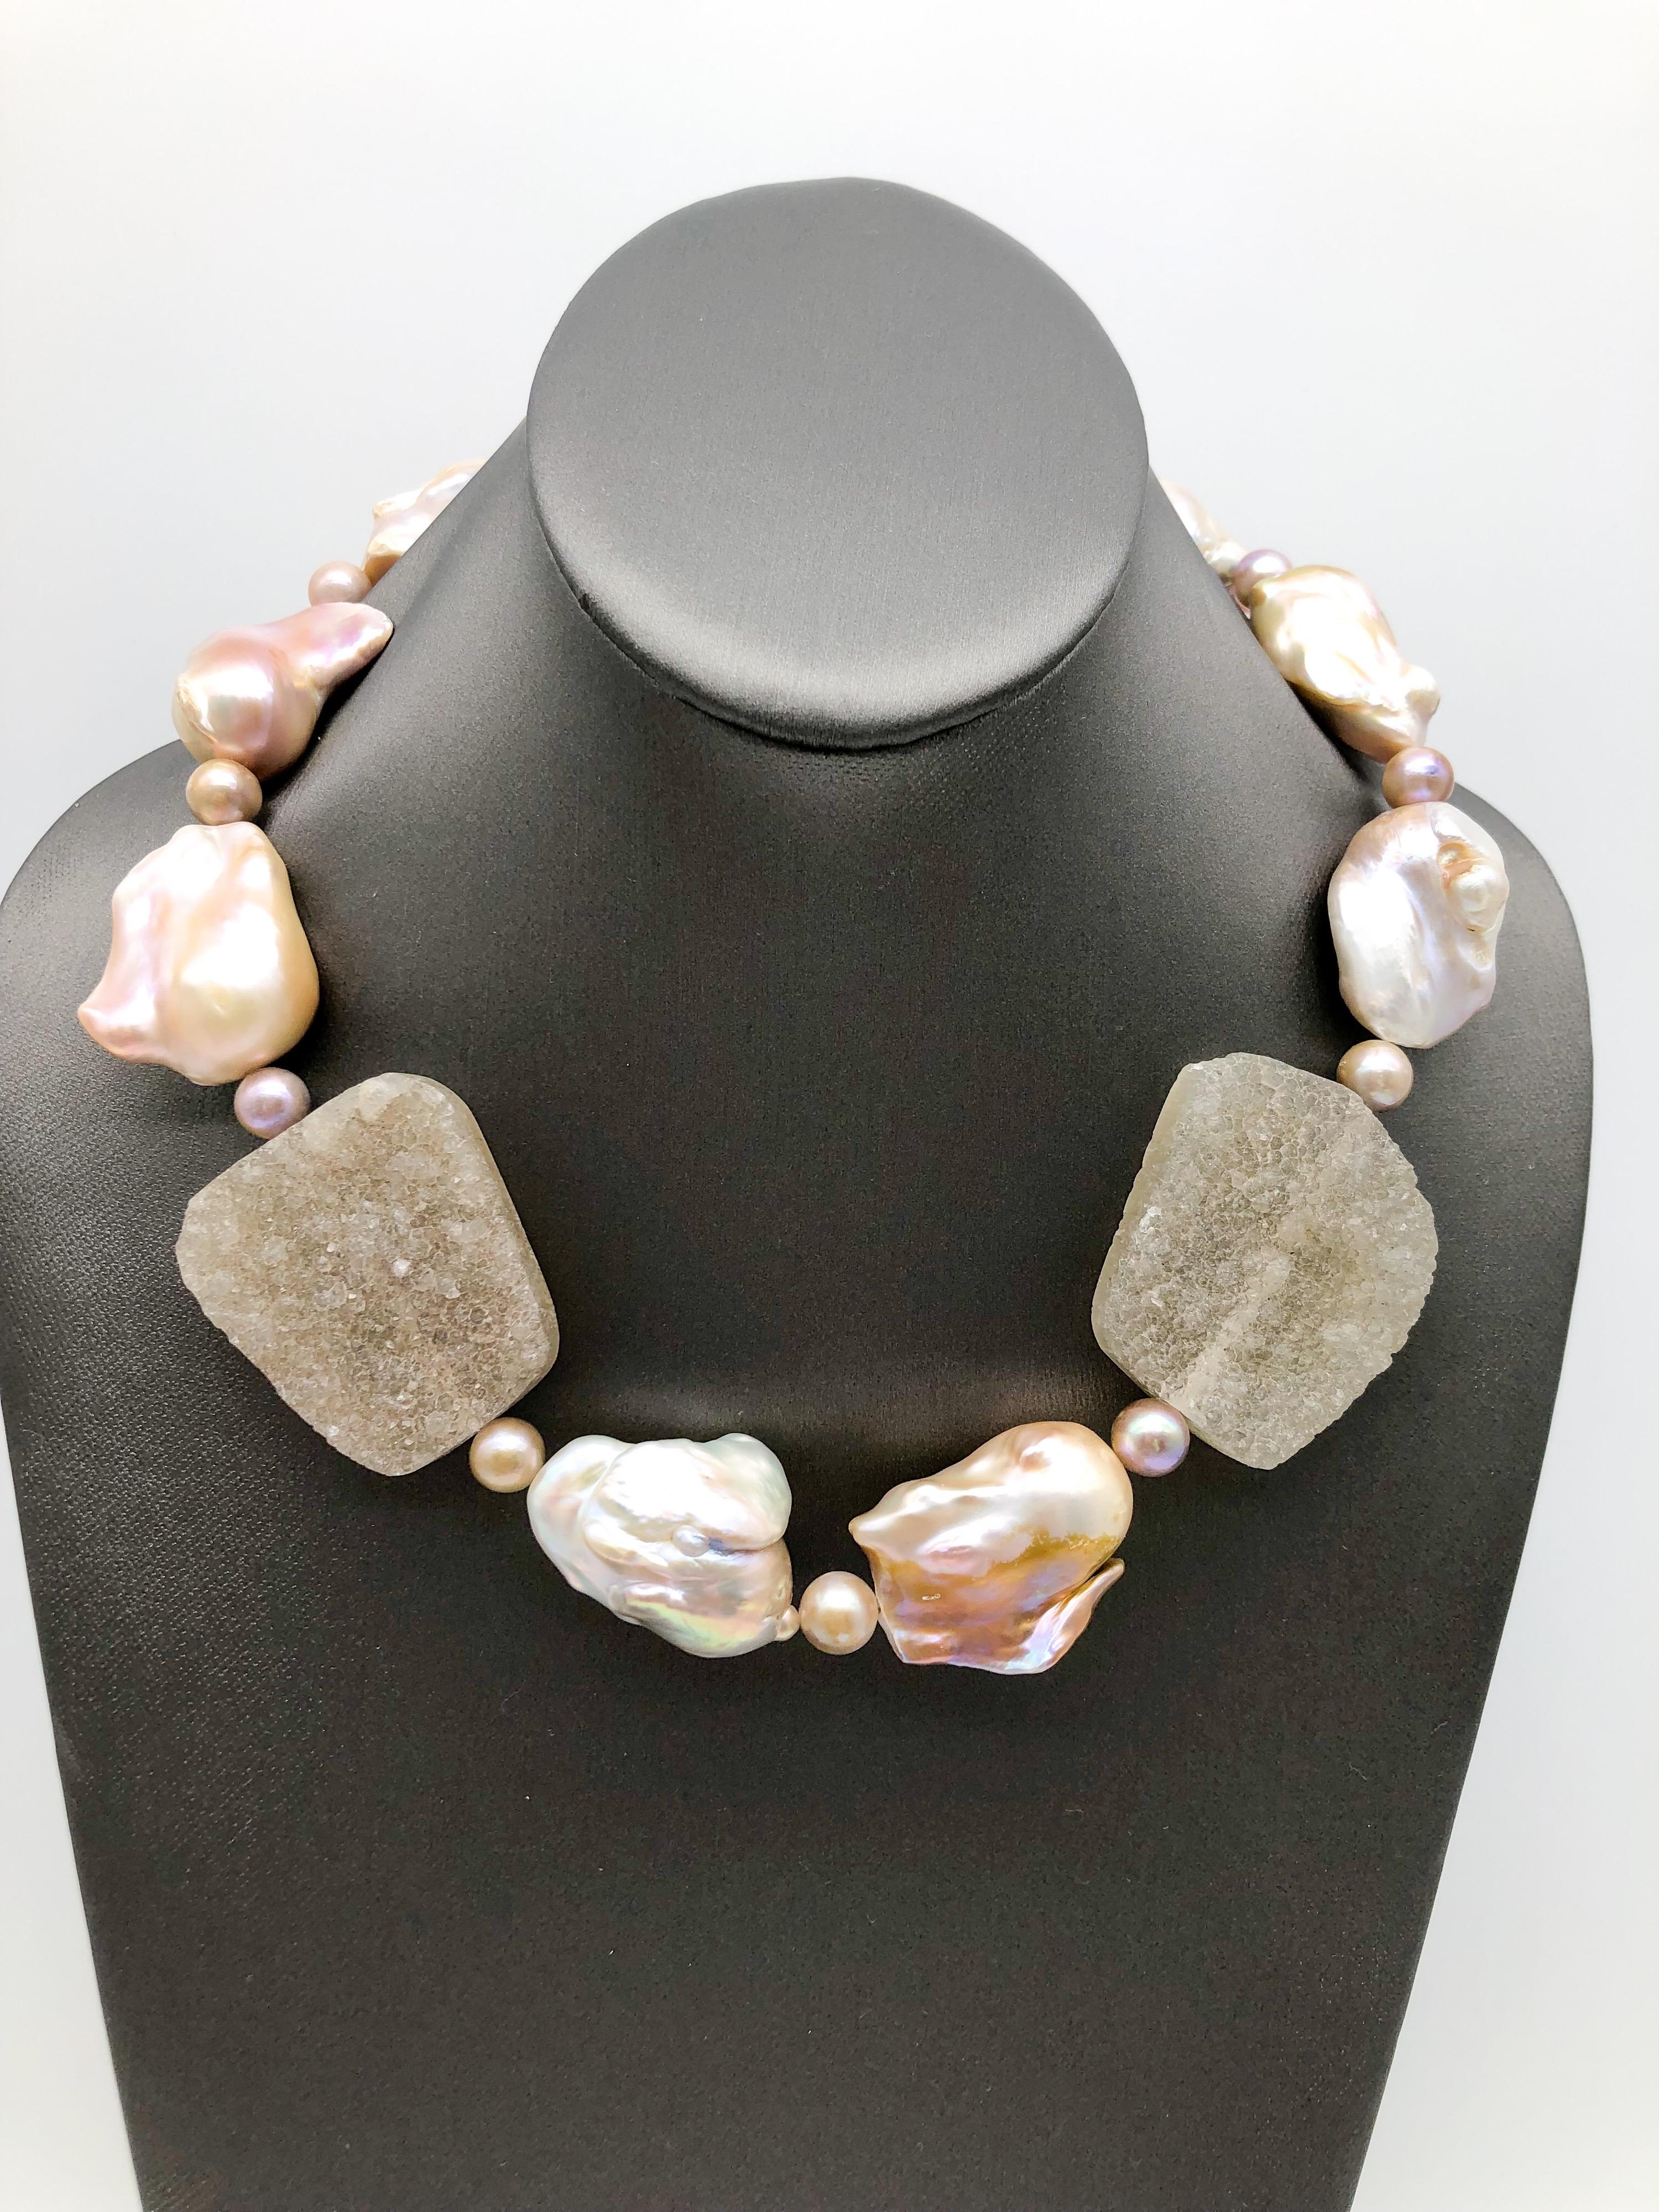 One-of-a-KInd

Make a statement in a dramatic pink Baroque Pearl and Brazilian Druzy single strand necklace. What is so eye-catching about this piece is the size and quality of each stone. Separated by 8mm Pearls there are only 10 huge stones each